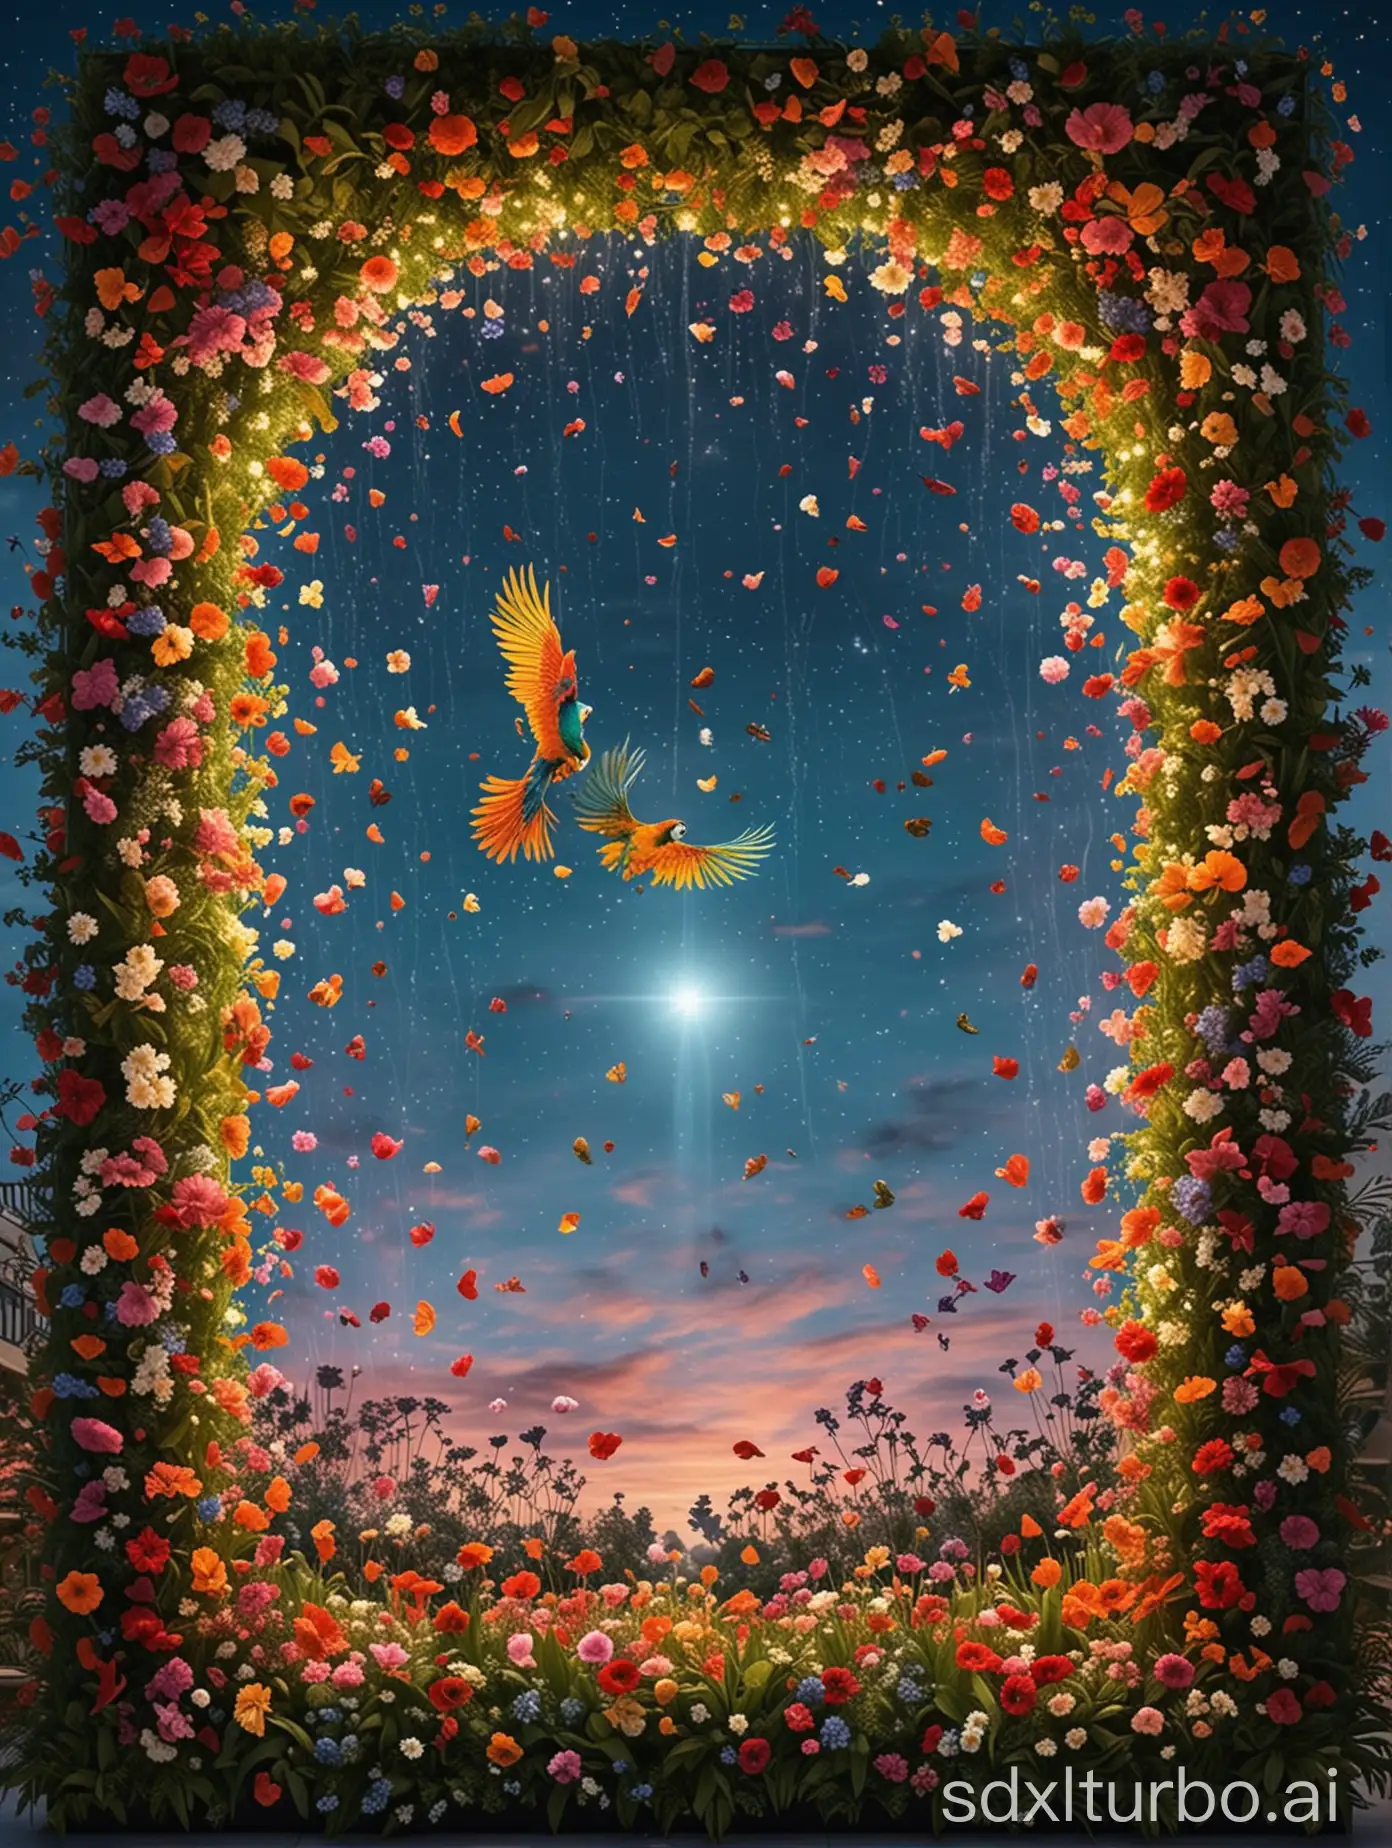 Colorful-Parrot-Soaring-Amidst-Illuminated-Floating-Flowers-in-Sky-Garden